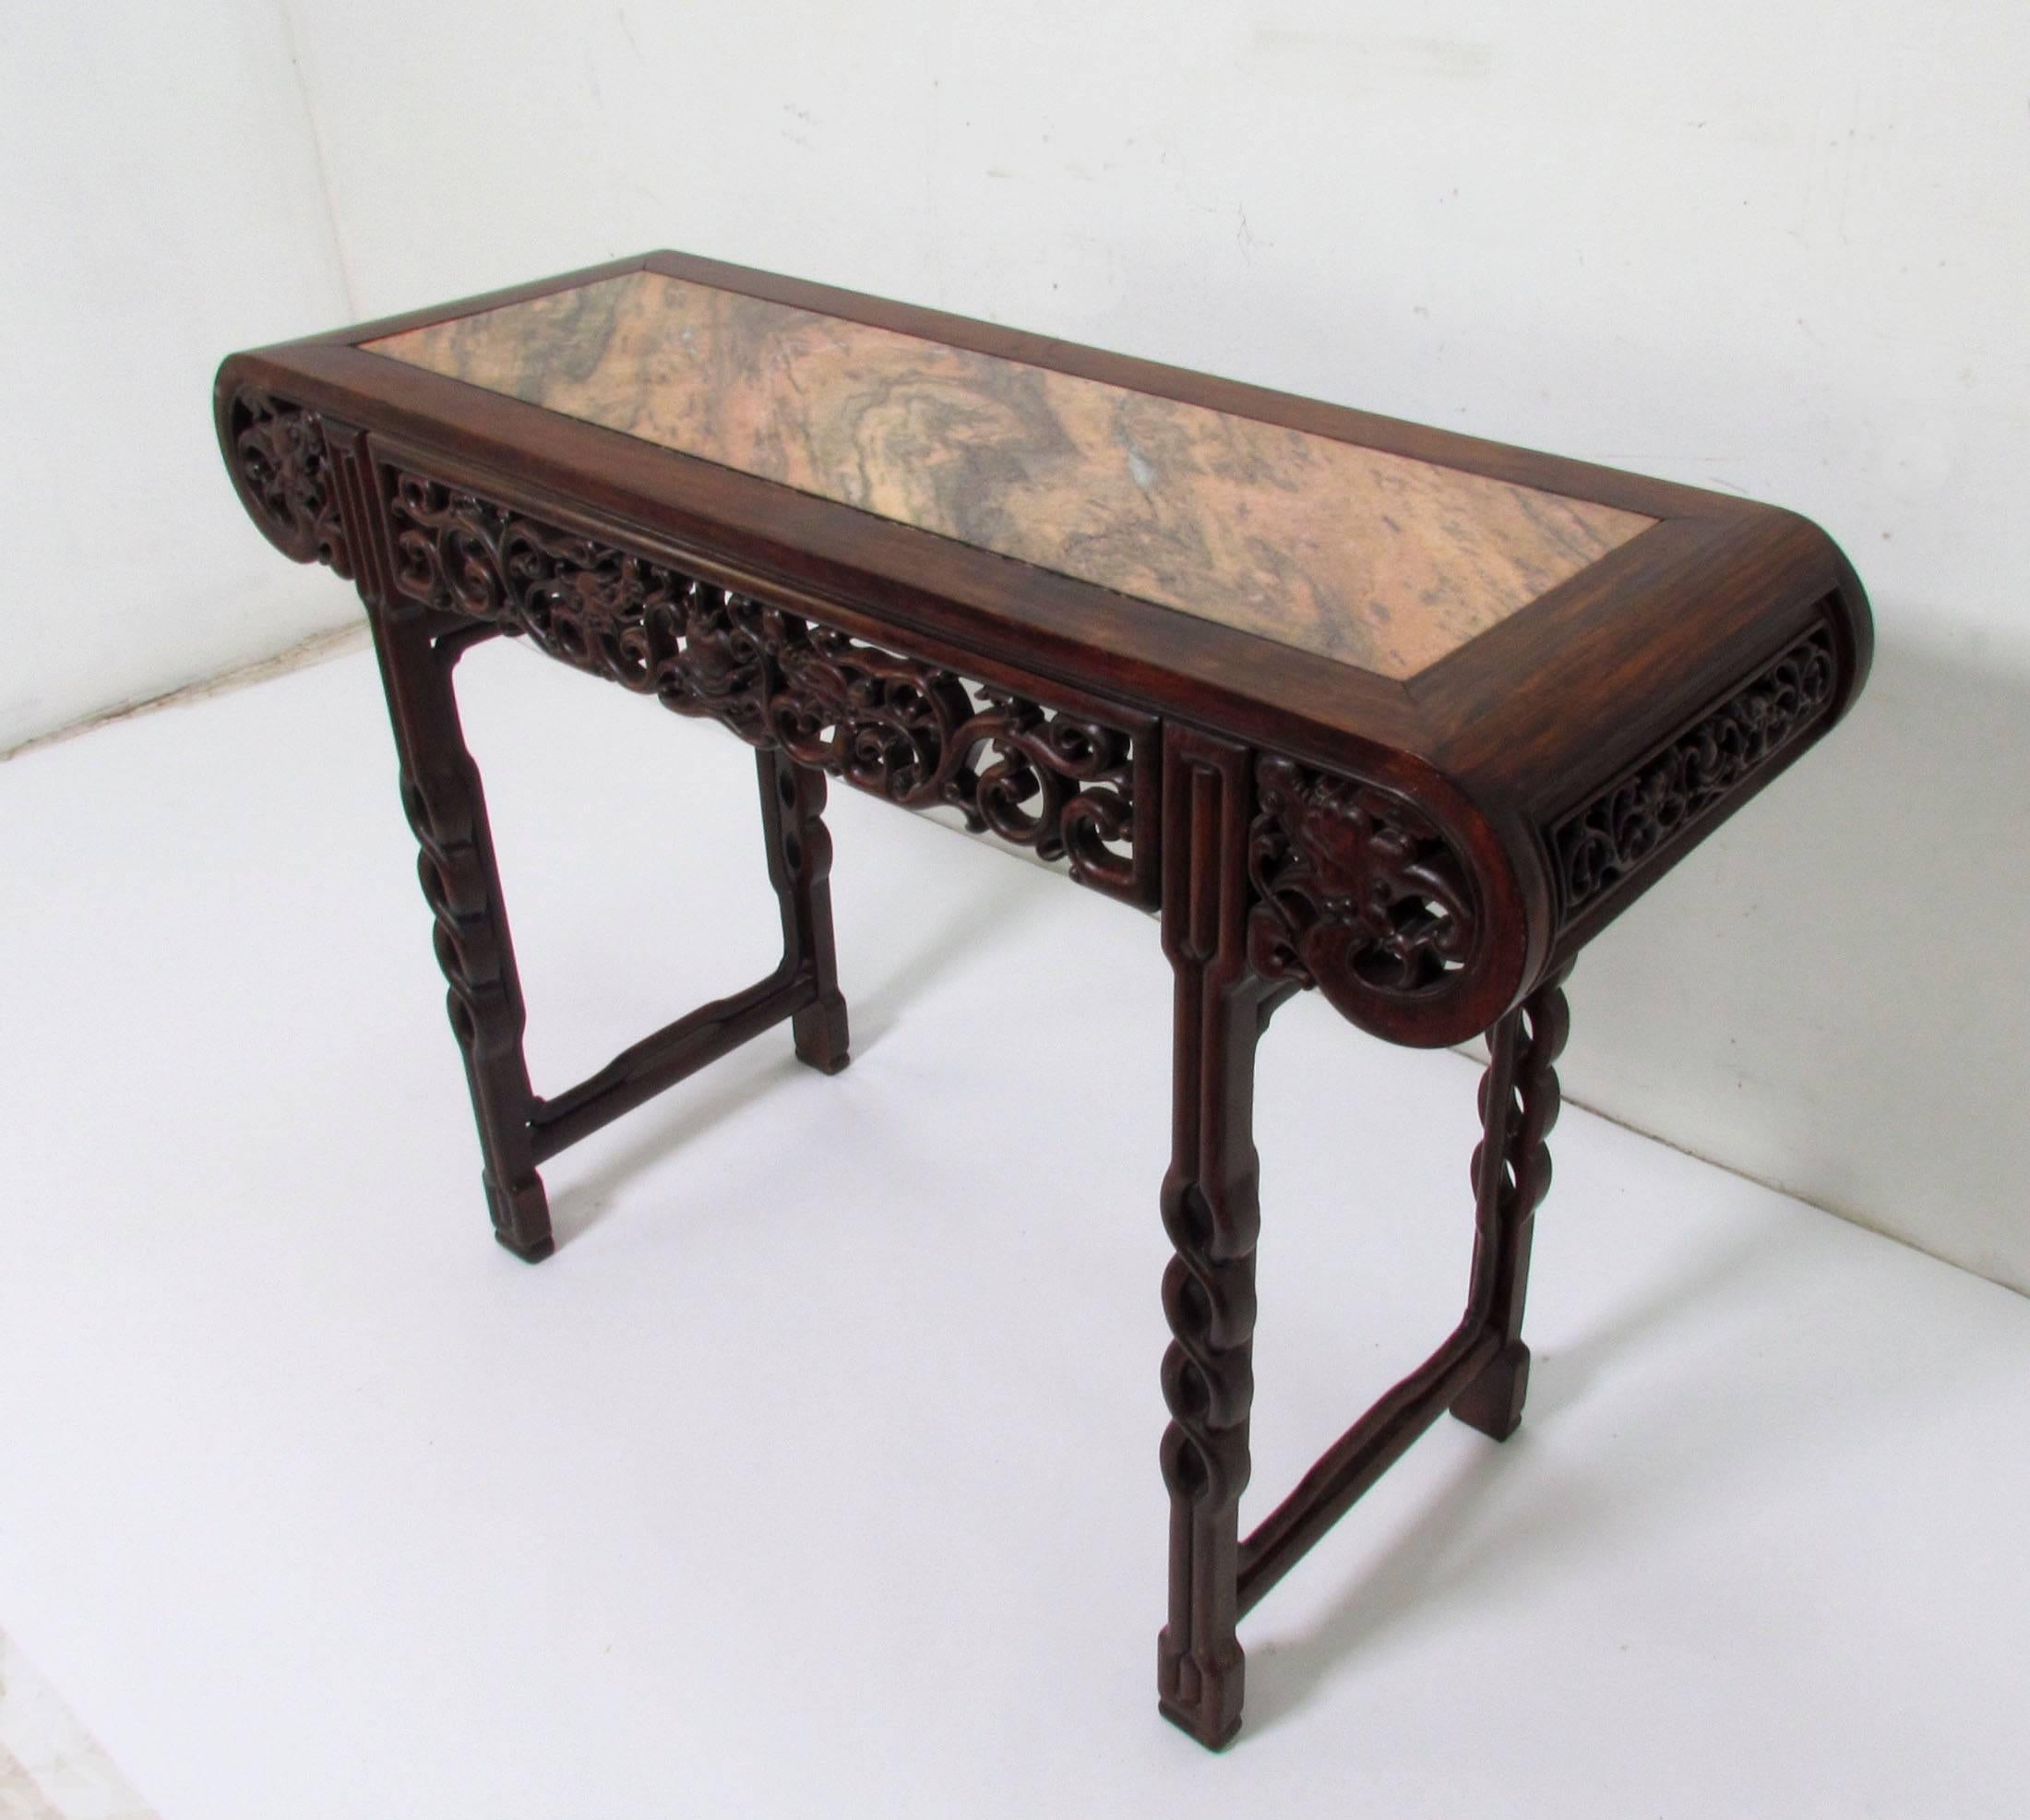 A delicately hand-carved rosewood altar or console table with open fretwork panels and leg carving.